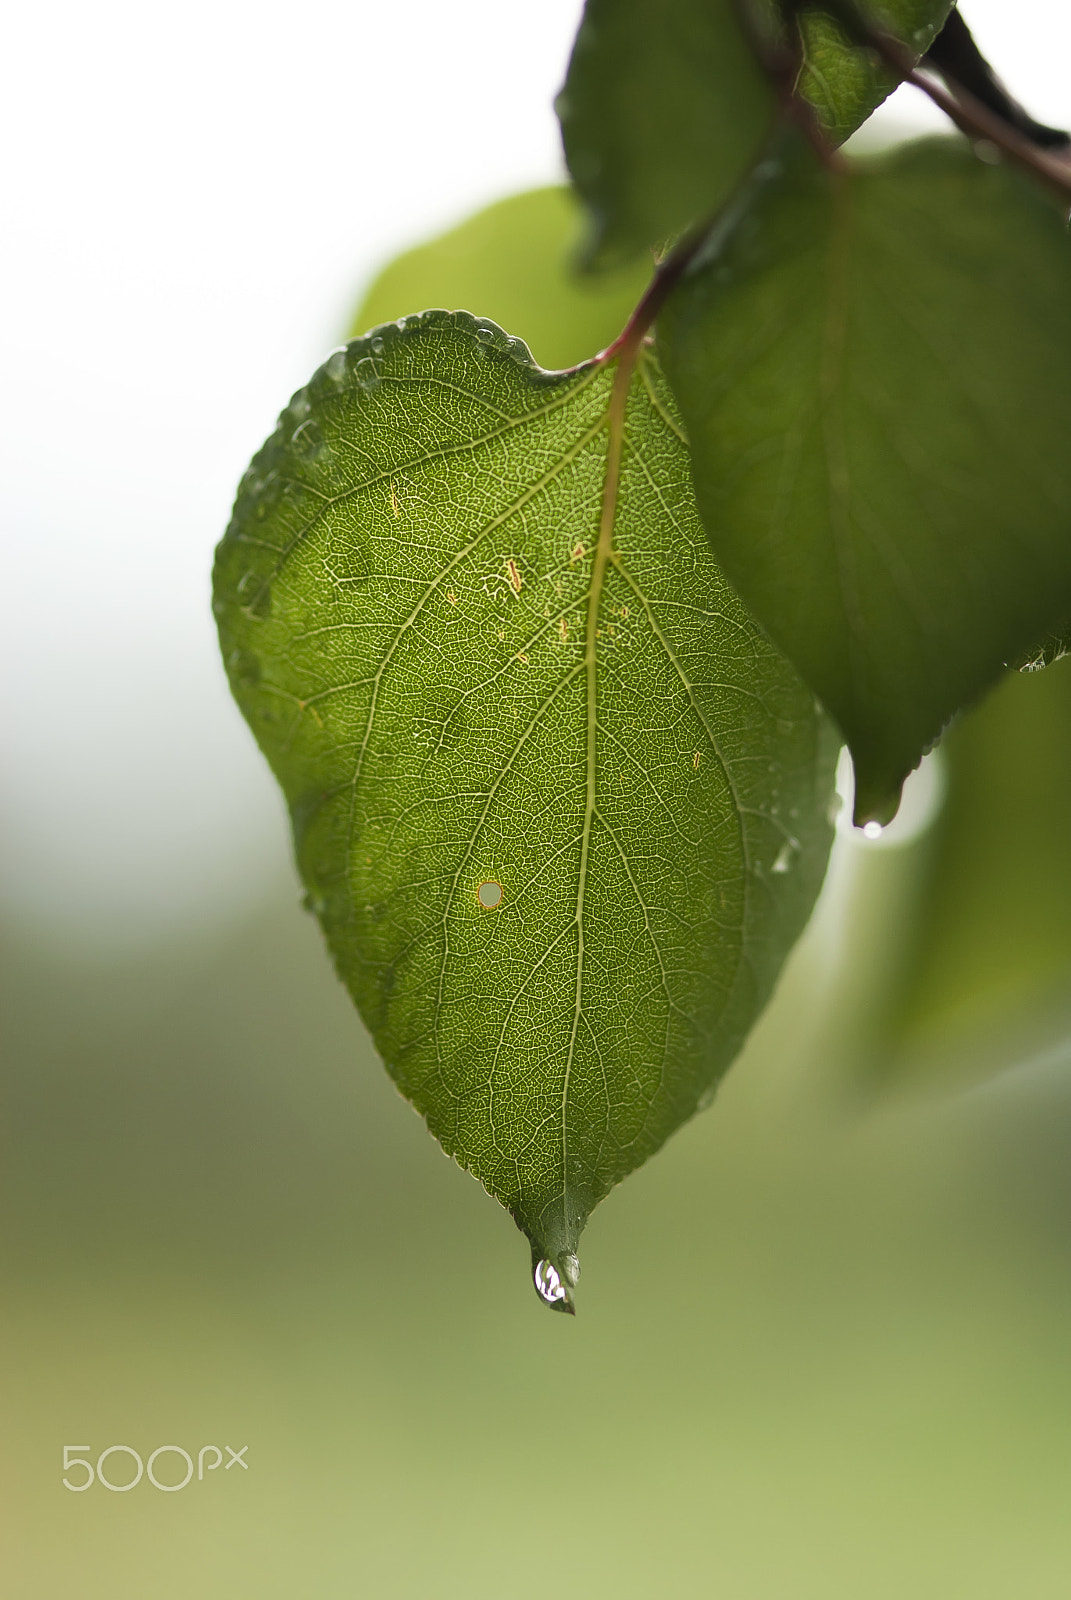 Nikon D60 + Nikon AF-S Micro-Nikkor 105mm F2.8G IF-ED VR sample photo. Apricot leaf with rain drops photography